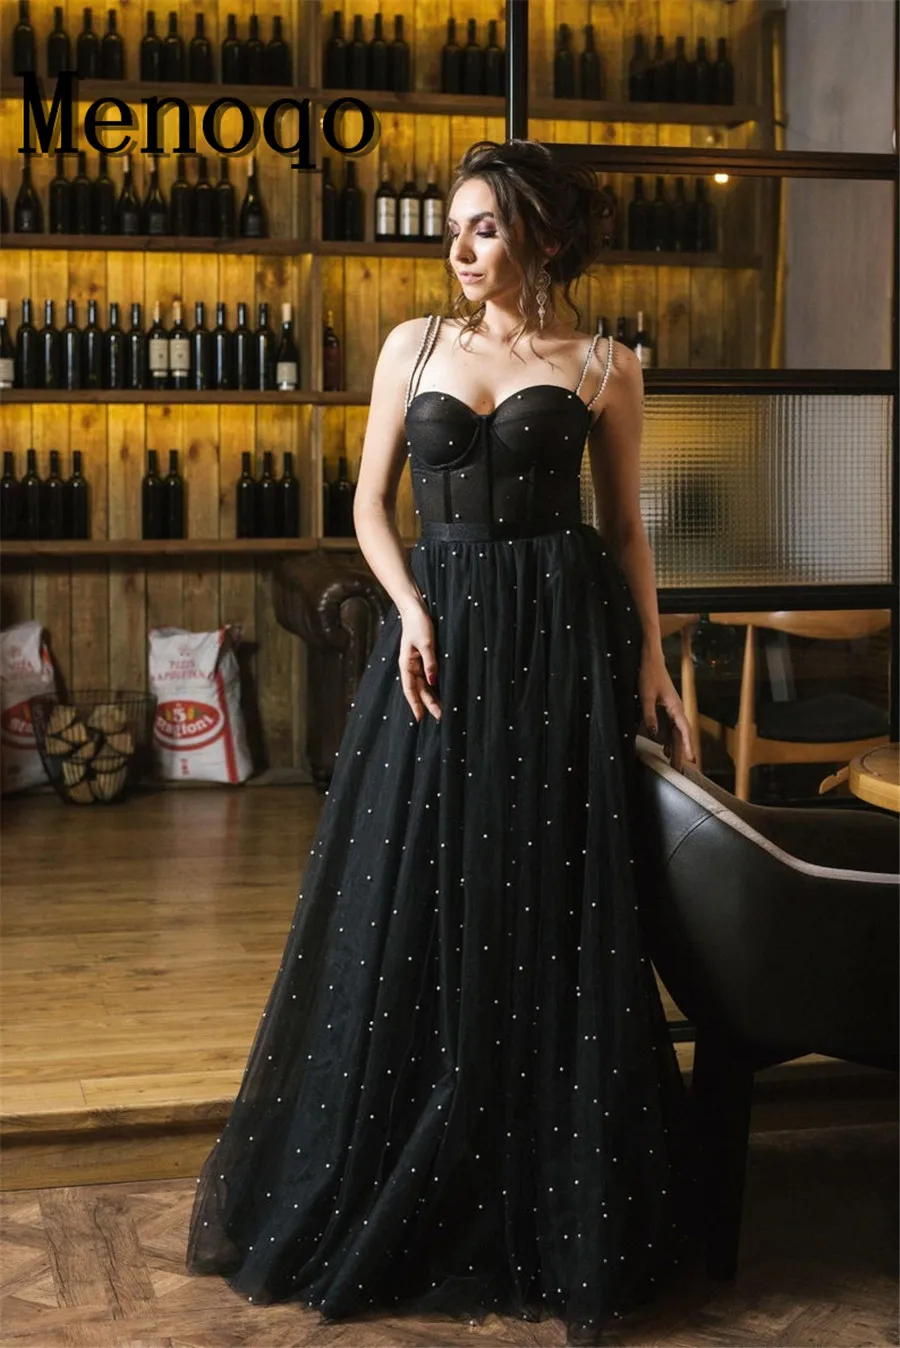 

menoqo Black Tulle Prom Dresses Sparkly Sweetheart Wedding Party Dresses Long A-Line Prom Gown فساتين السهرة